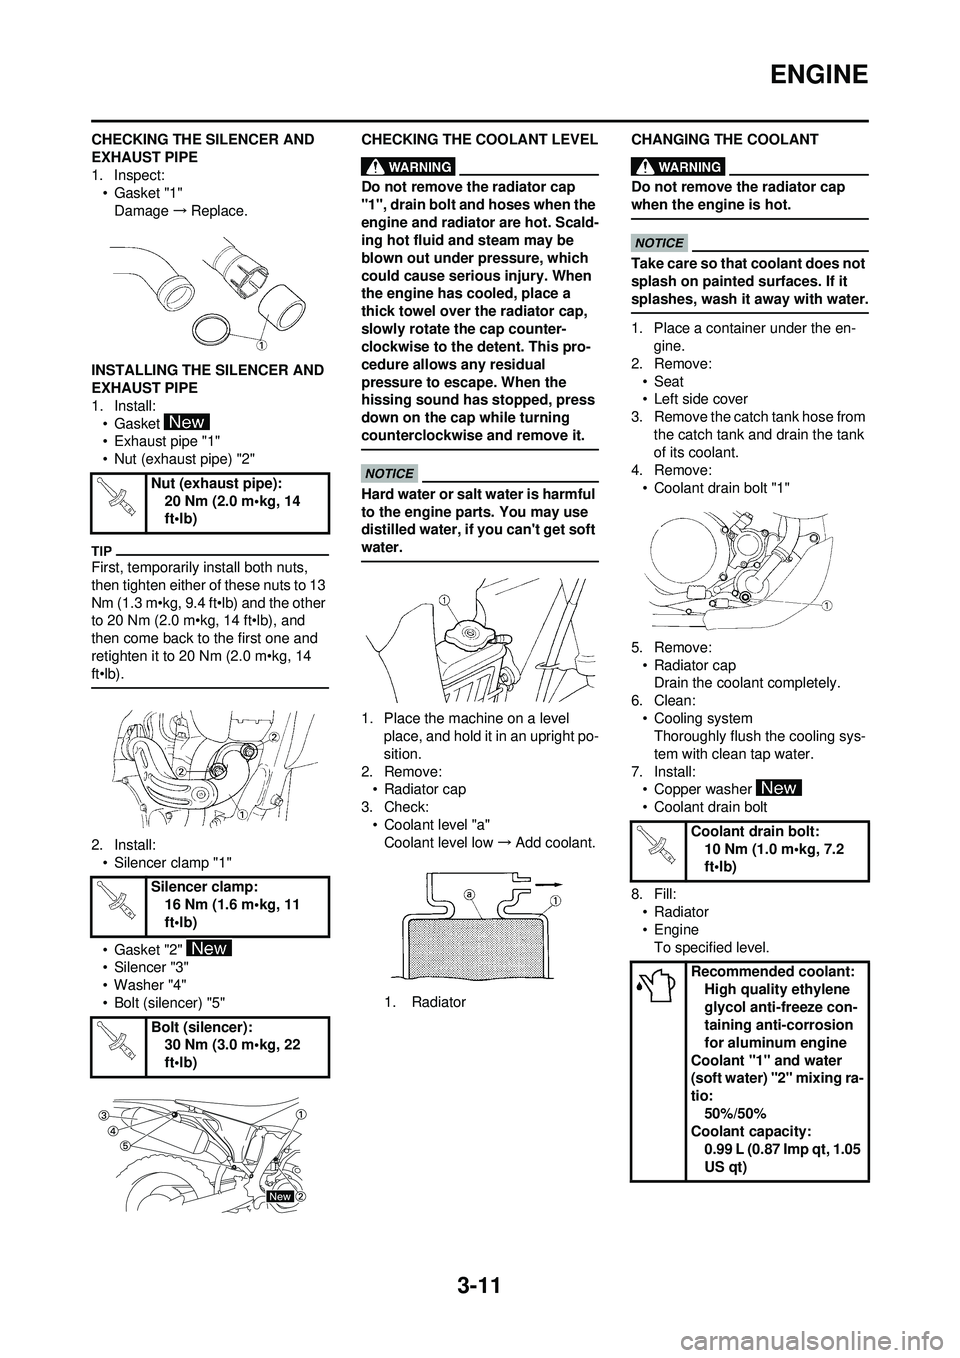 YAMAHA WR 250F 2009  Owners Manual 3-11
ENGINE
CHECKING THE SILENCER AND 
EXHAUST PIPE
1. Inspect:•Gasket "1"
Damage →Replace.
INSTALLING THE SILENCER AND 
EXHAUST PIPE
1. Install: •Gasket 
• Exhaust pipe "1"
• Nut (exhaust p